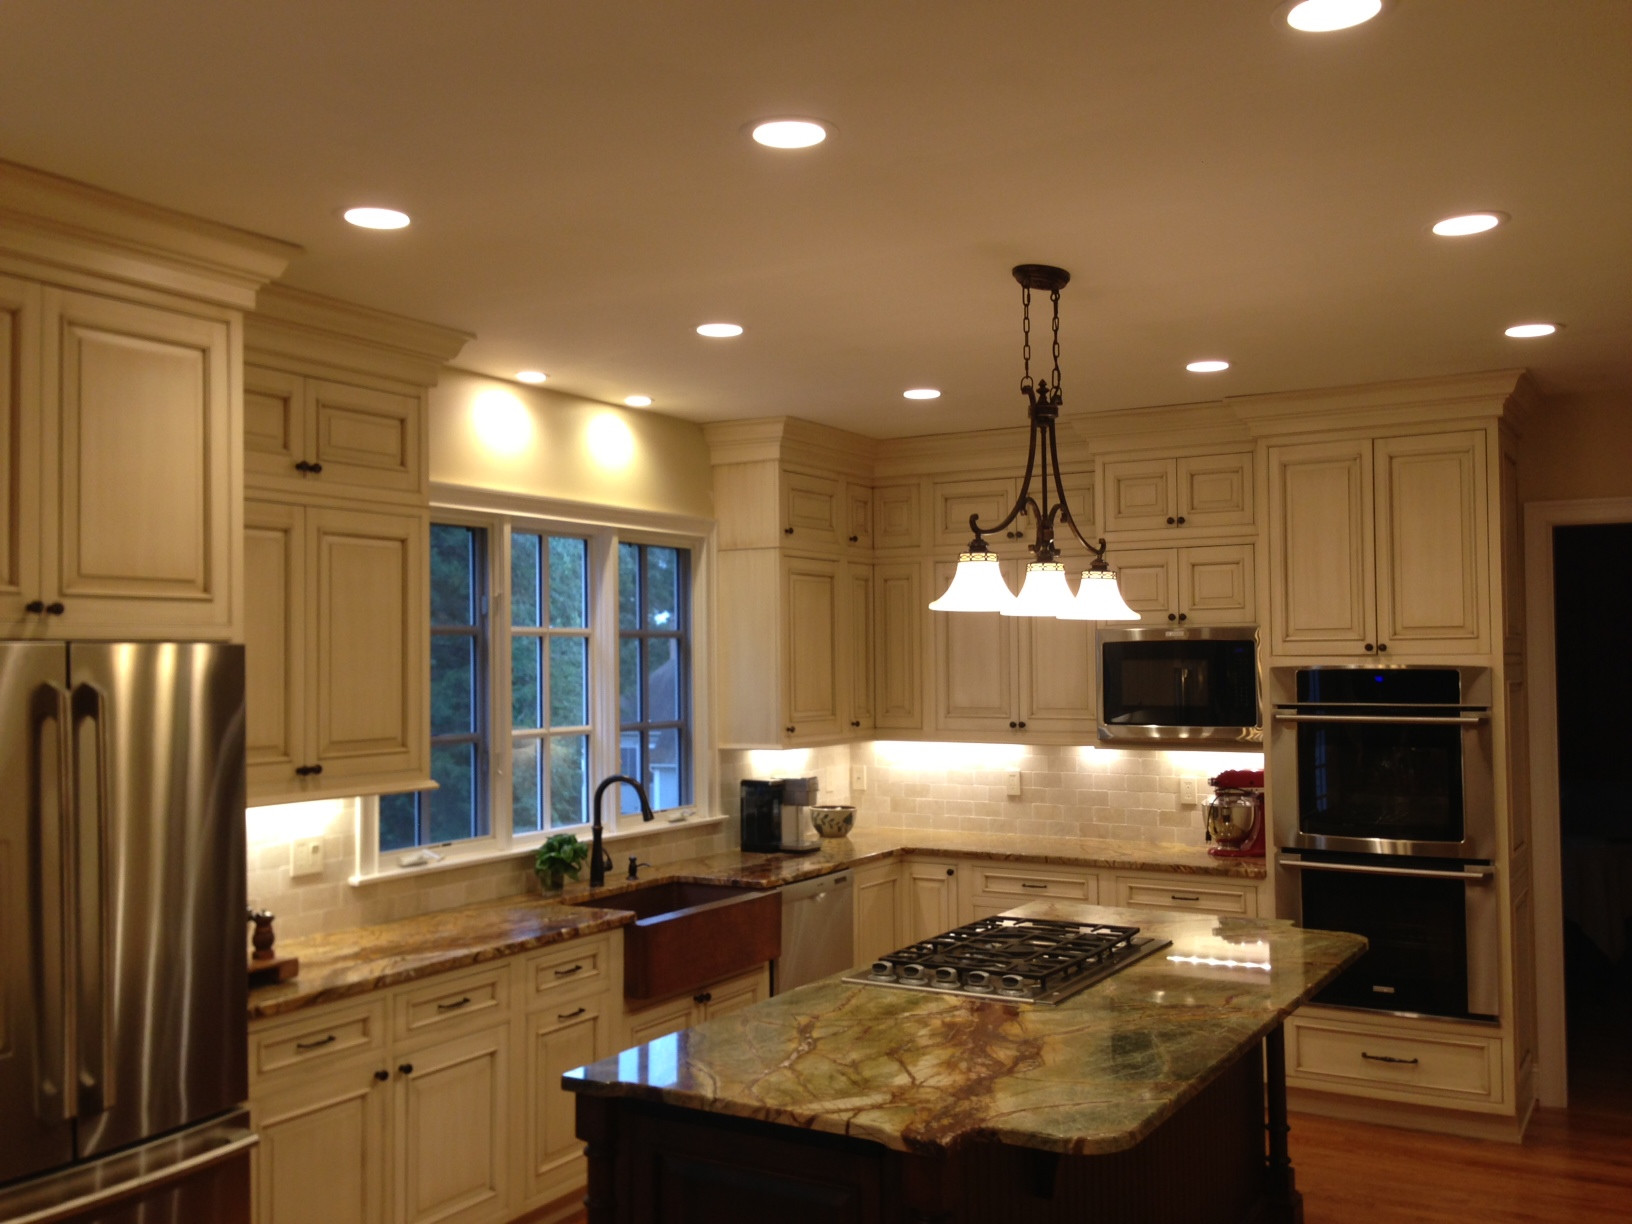 Recessed Lighting Layout Kitchen
 Pot Lighting In Kitchen BClight